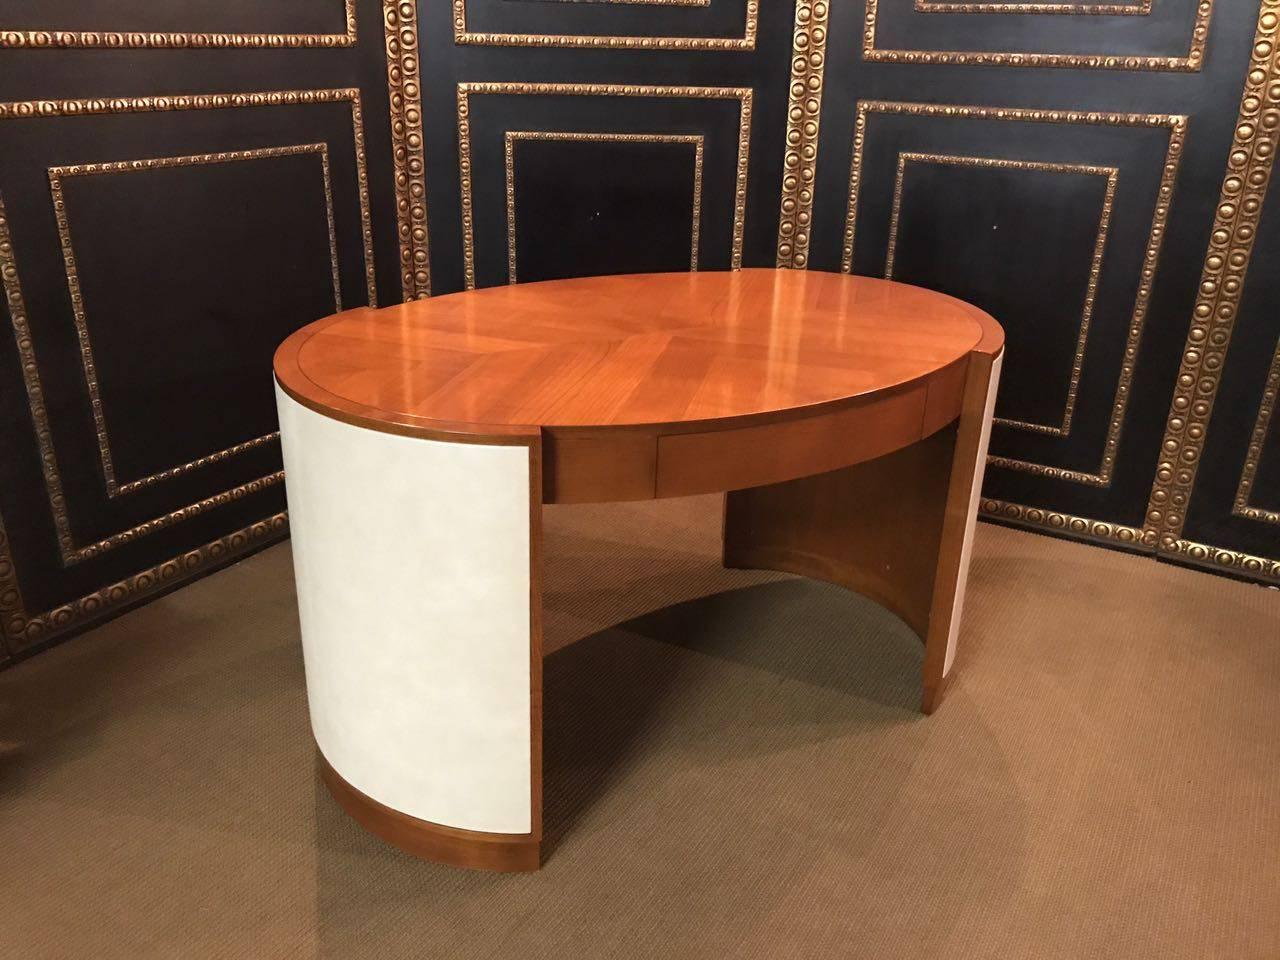 20th Century Rare Italy Oval Desk with Leather in Art Deco Style - Selva